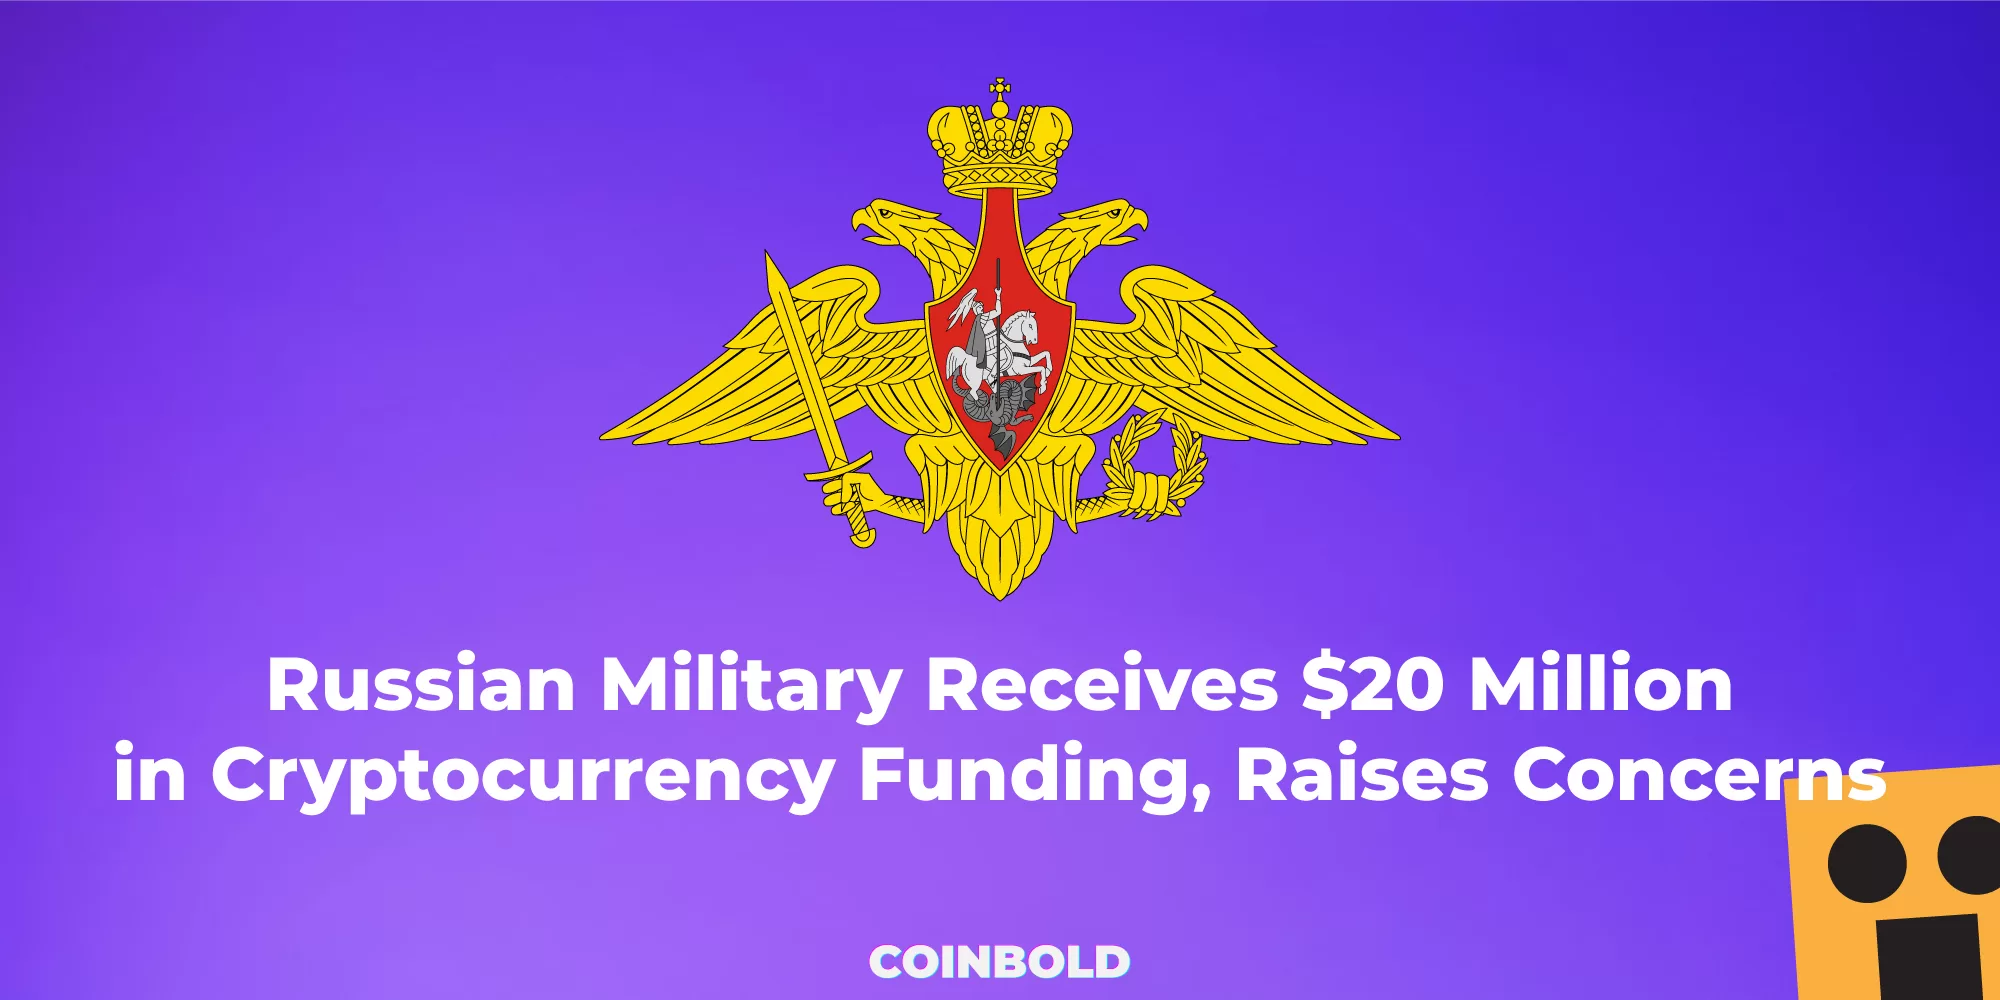 Russian Military Receives $20 Million in Cryptocurrency Funding, Raises Concerns